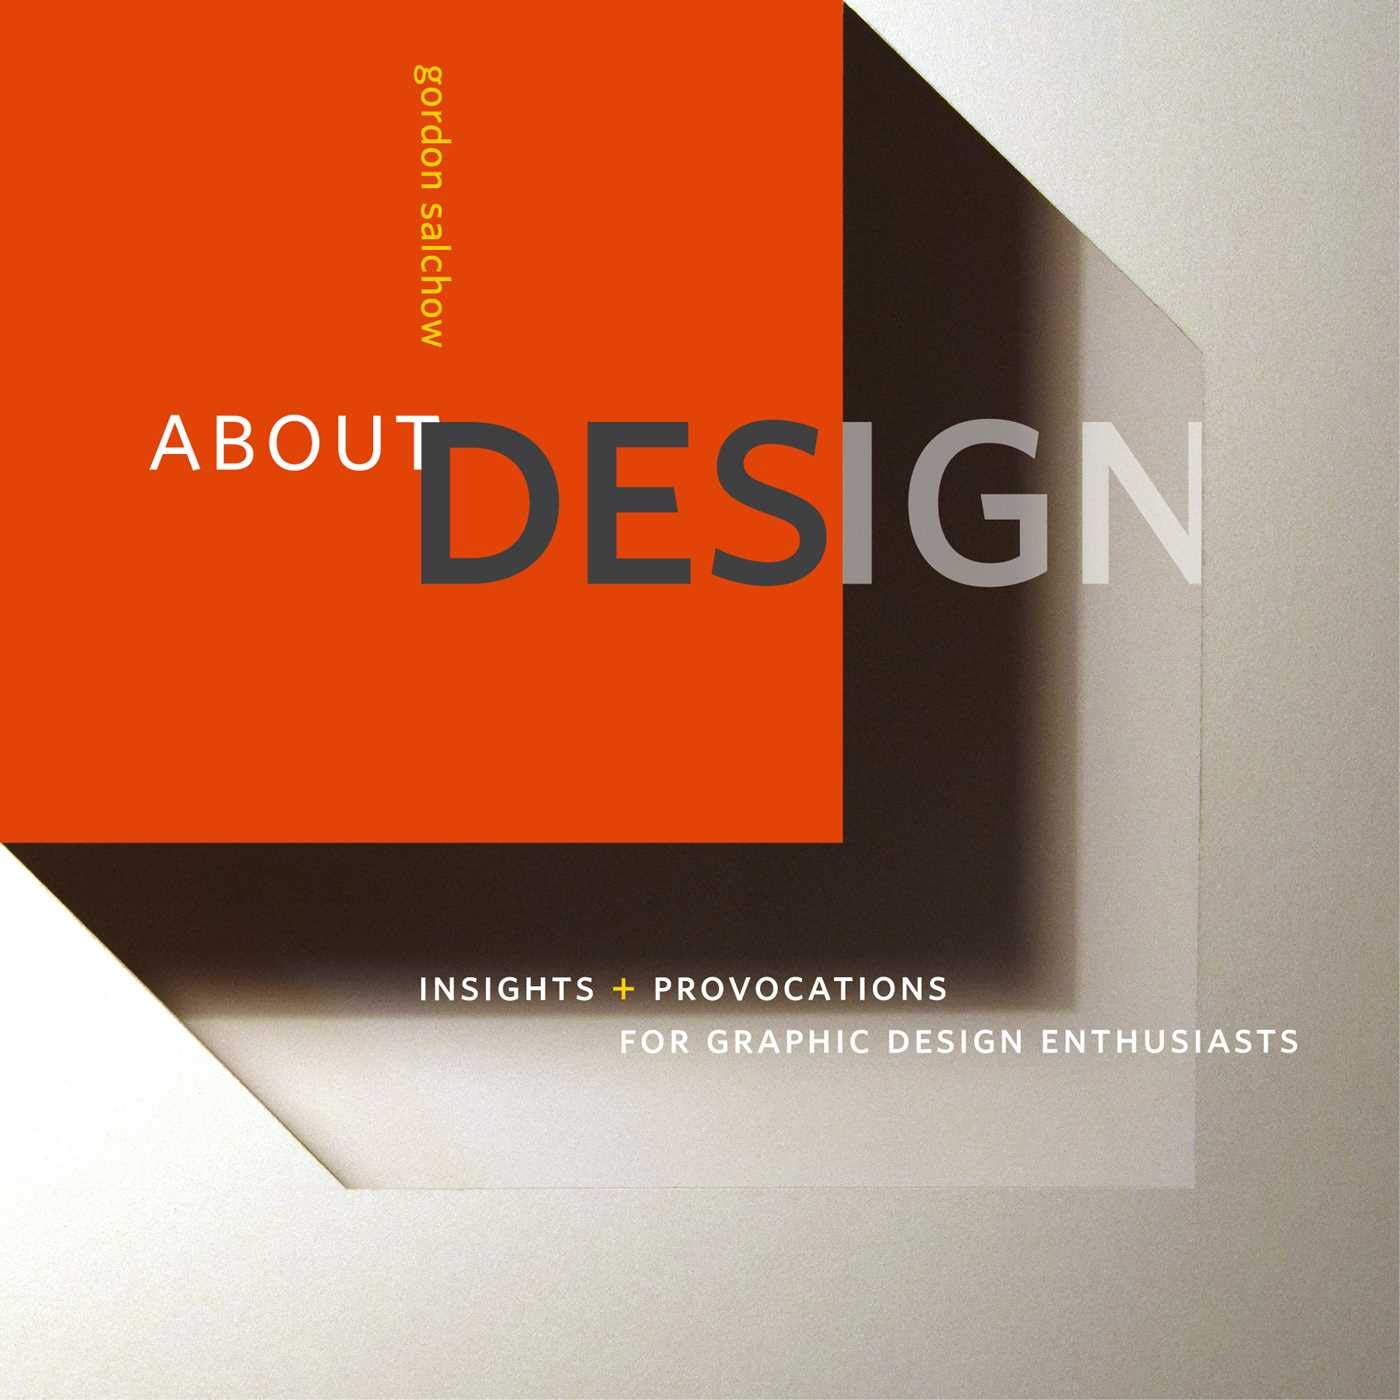 About Design: Insights and Provocations